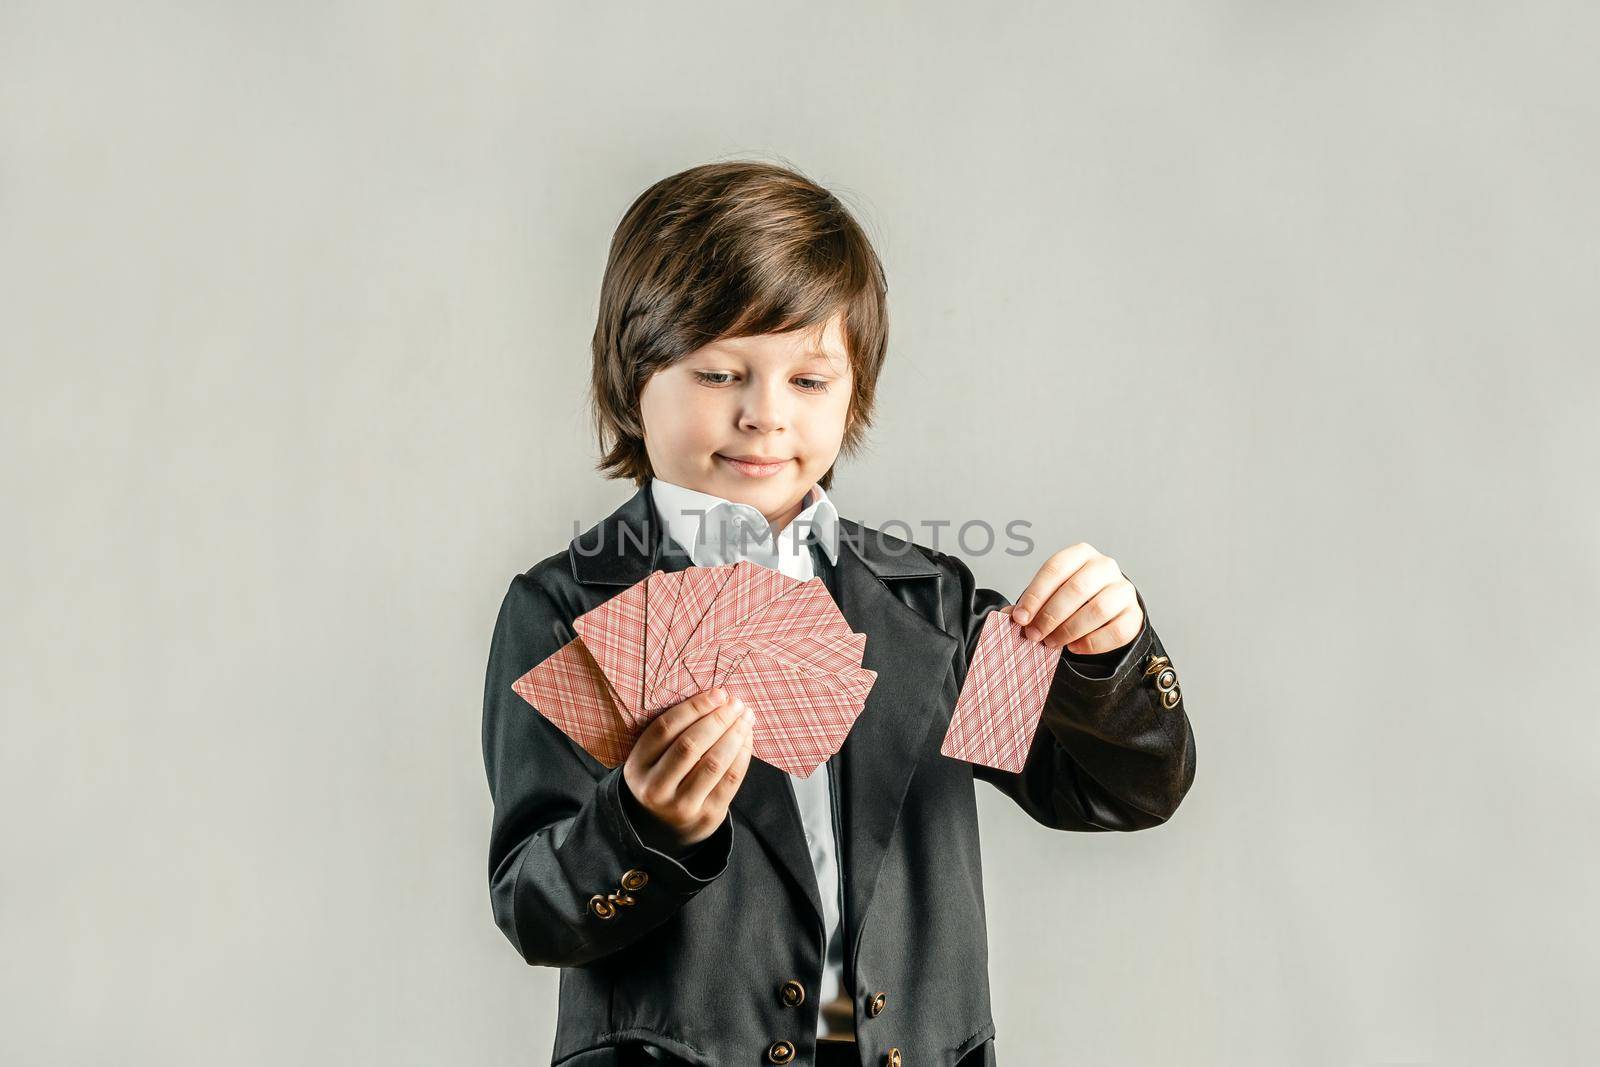 Young six year old boy wearing black suit and showing playing cards trick during illusionist performance. Pocker player